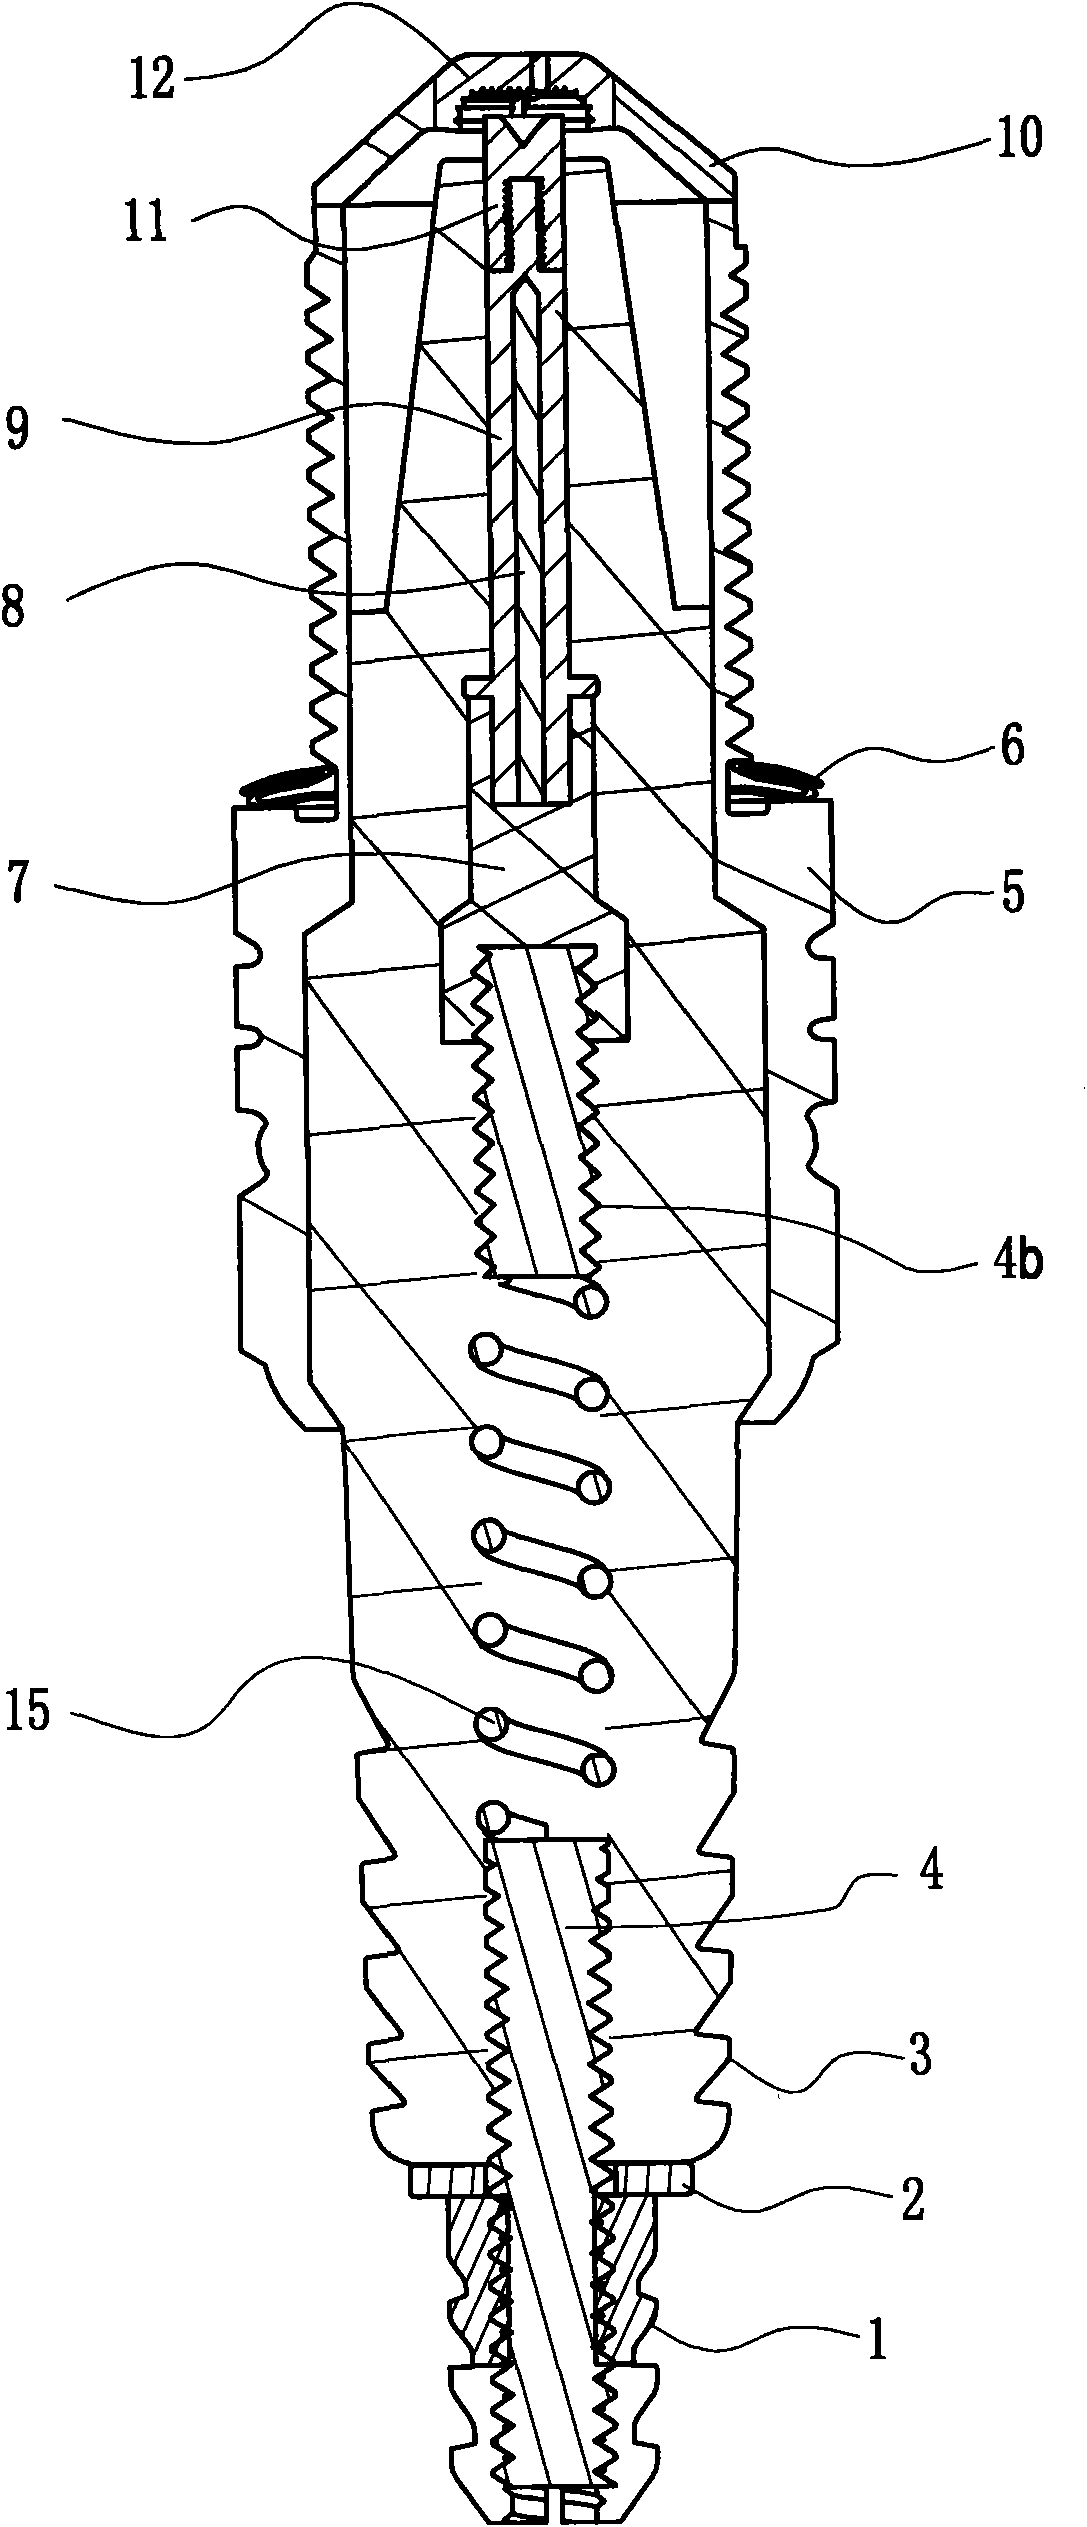 Spark plug of gasoline engine with multiple laterals and multifold gap